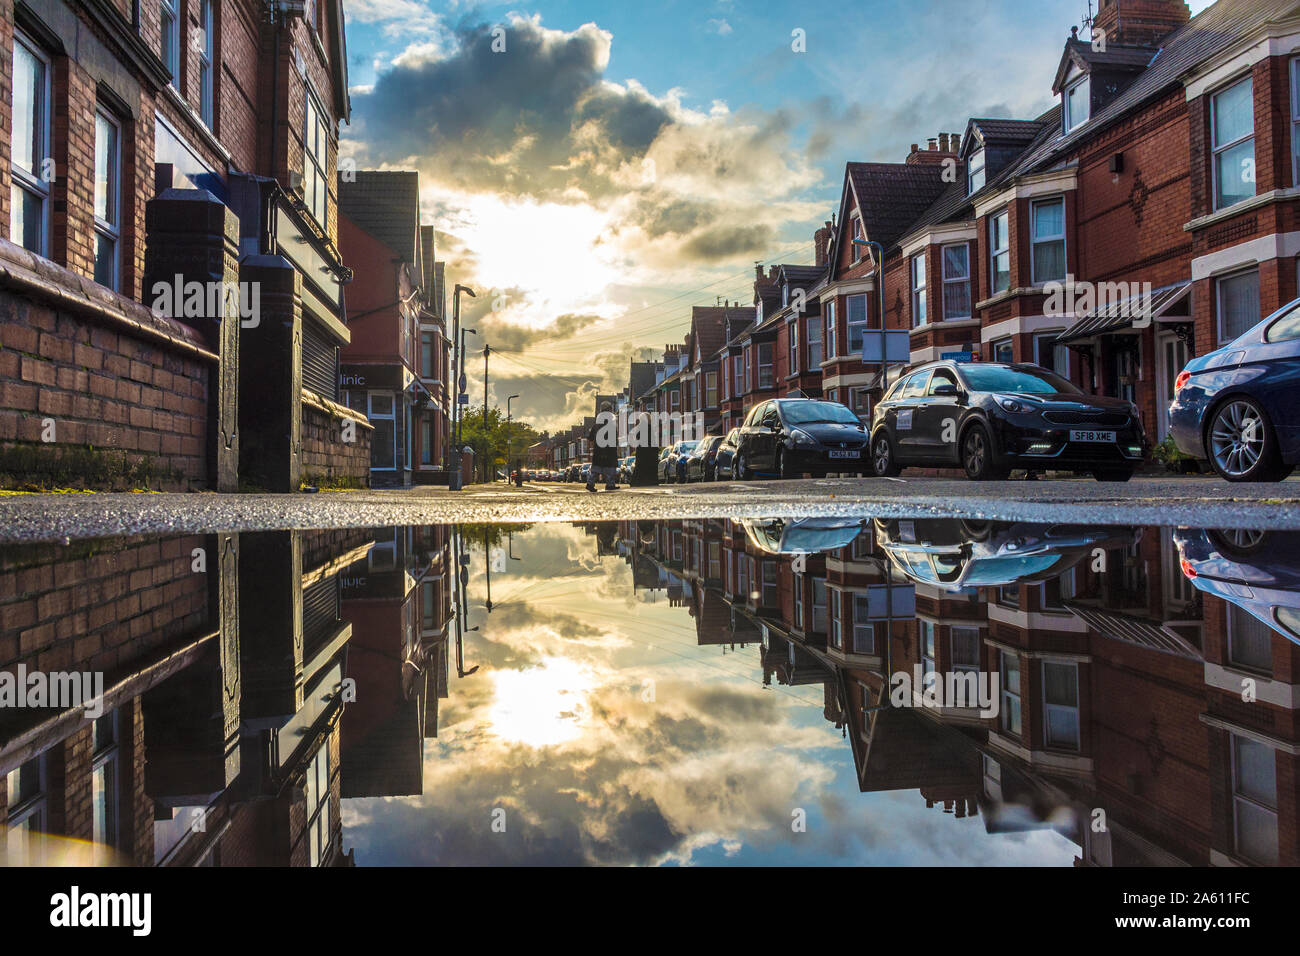 Penny Lane reflections, Liverpool, UK. The street made famous in The Beatles song. Stock Photo